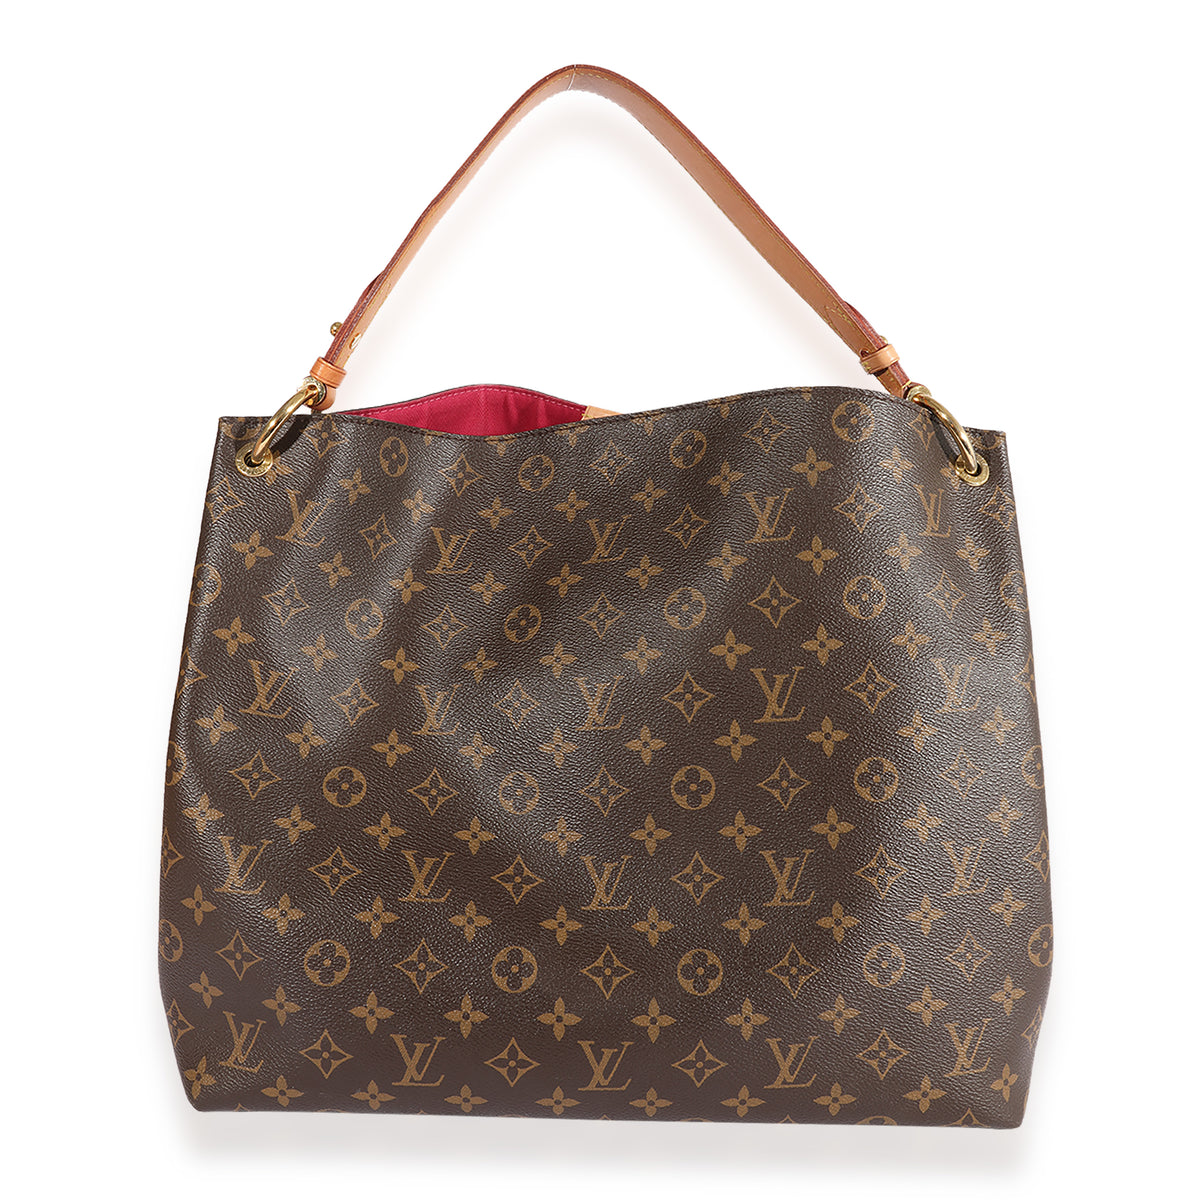 Louis Vuitton - Authenticated Graceful Handbag - Cloth Brown For Woman, Very Good condition